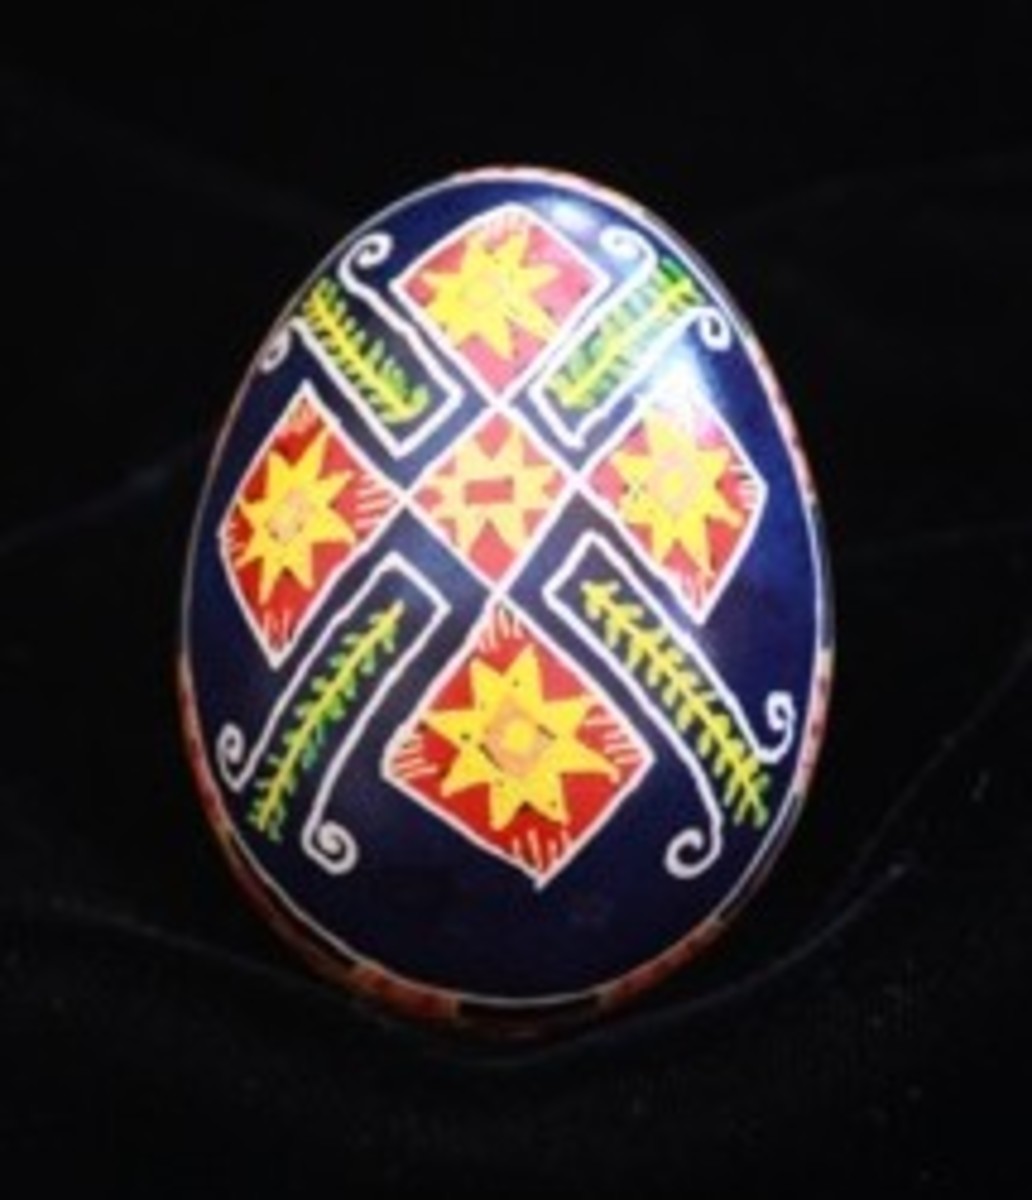 Again the eight-pointed star is present in this egg along with the pine branches.  Each egg usually has the main design repeated on two sides, with an intricate border separating them.